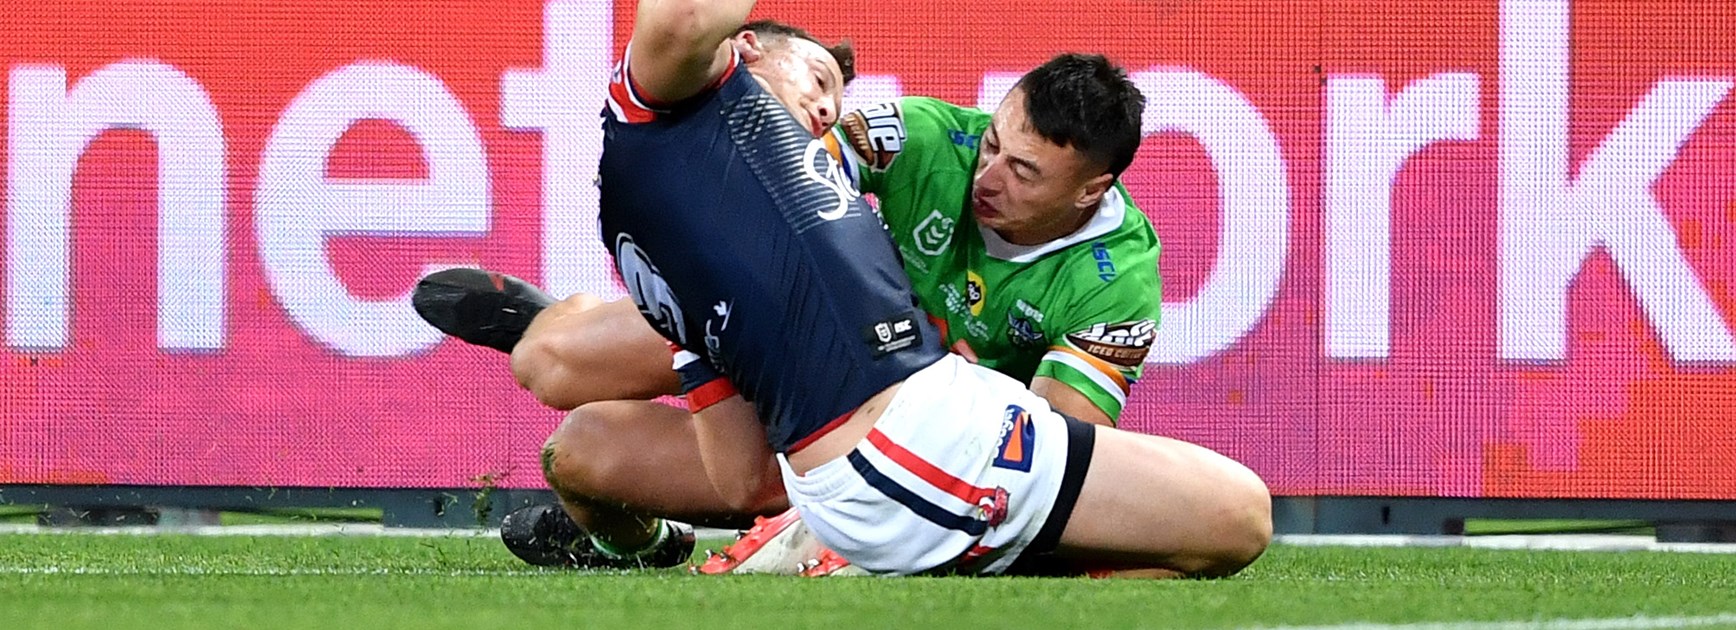 Smith's epic trysaver on Cotric best tackle of the NRL finals